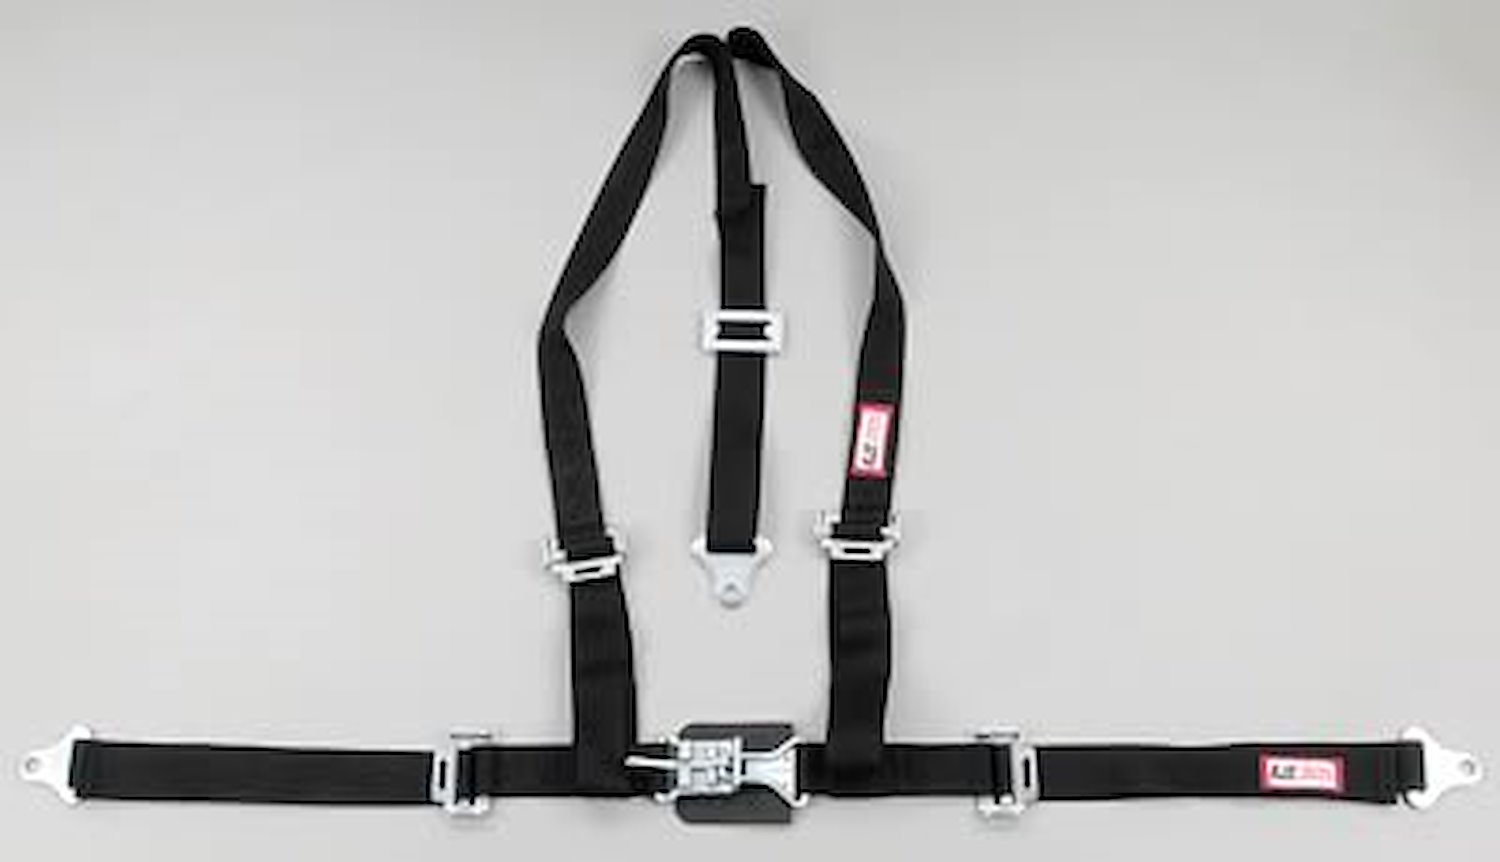 NON-SFI L&L HARNESS 3 PULL UP Lap BELT SEWN IN 2 S.H. Y FLOOR Mount ALL WRAP ENDS HOT PINK